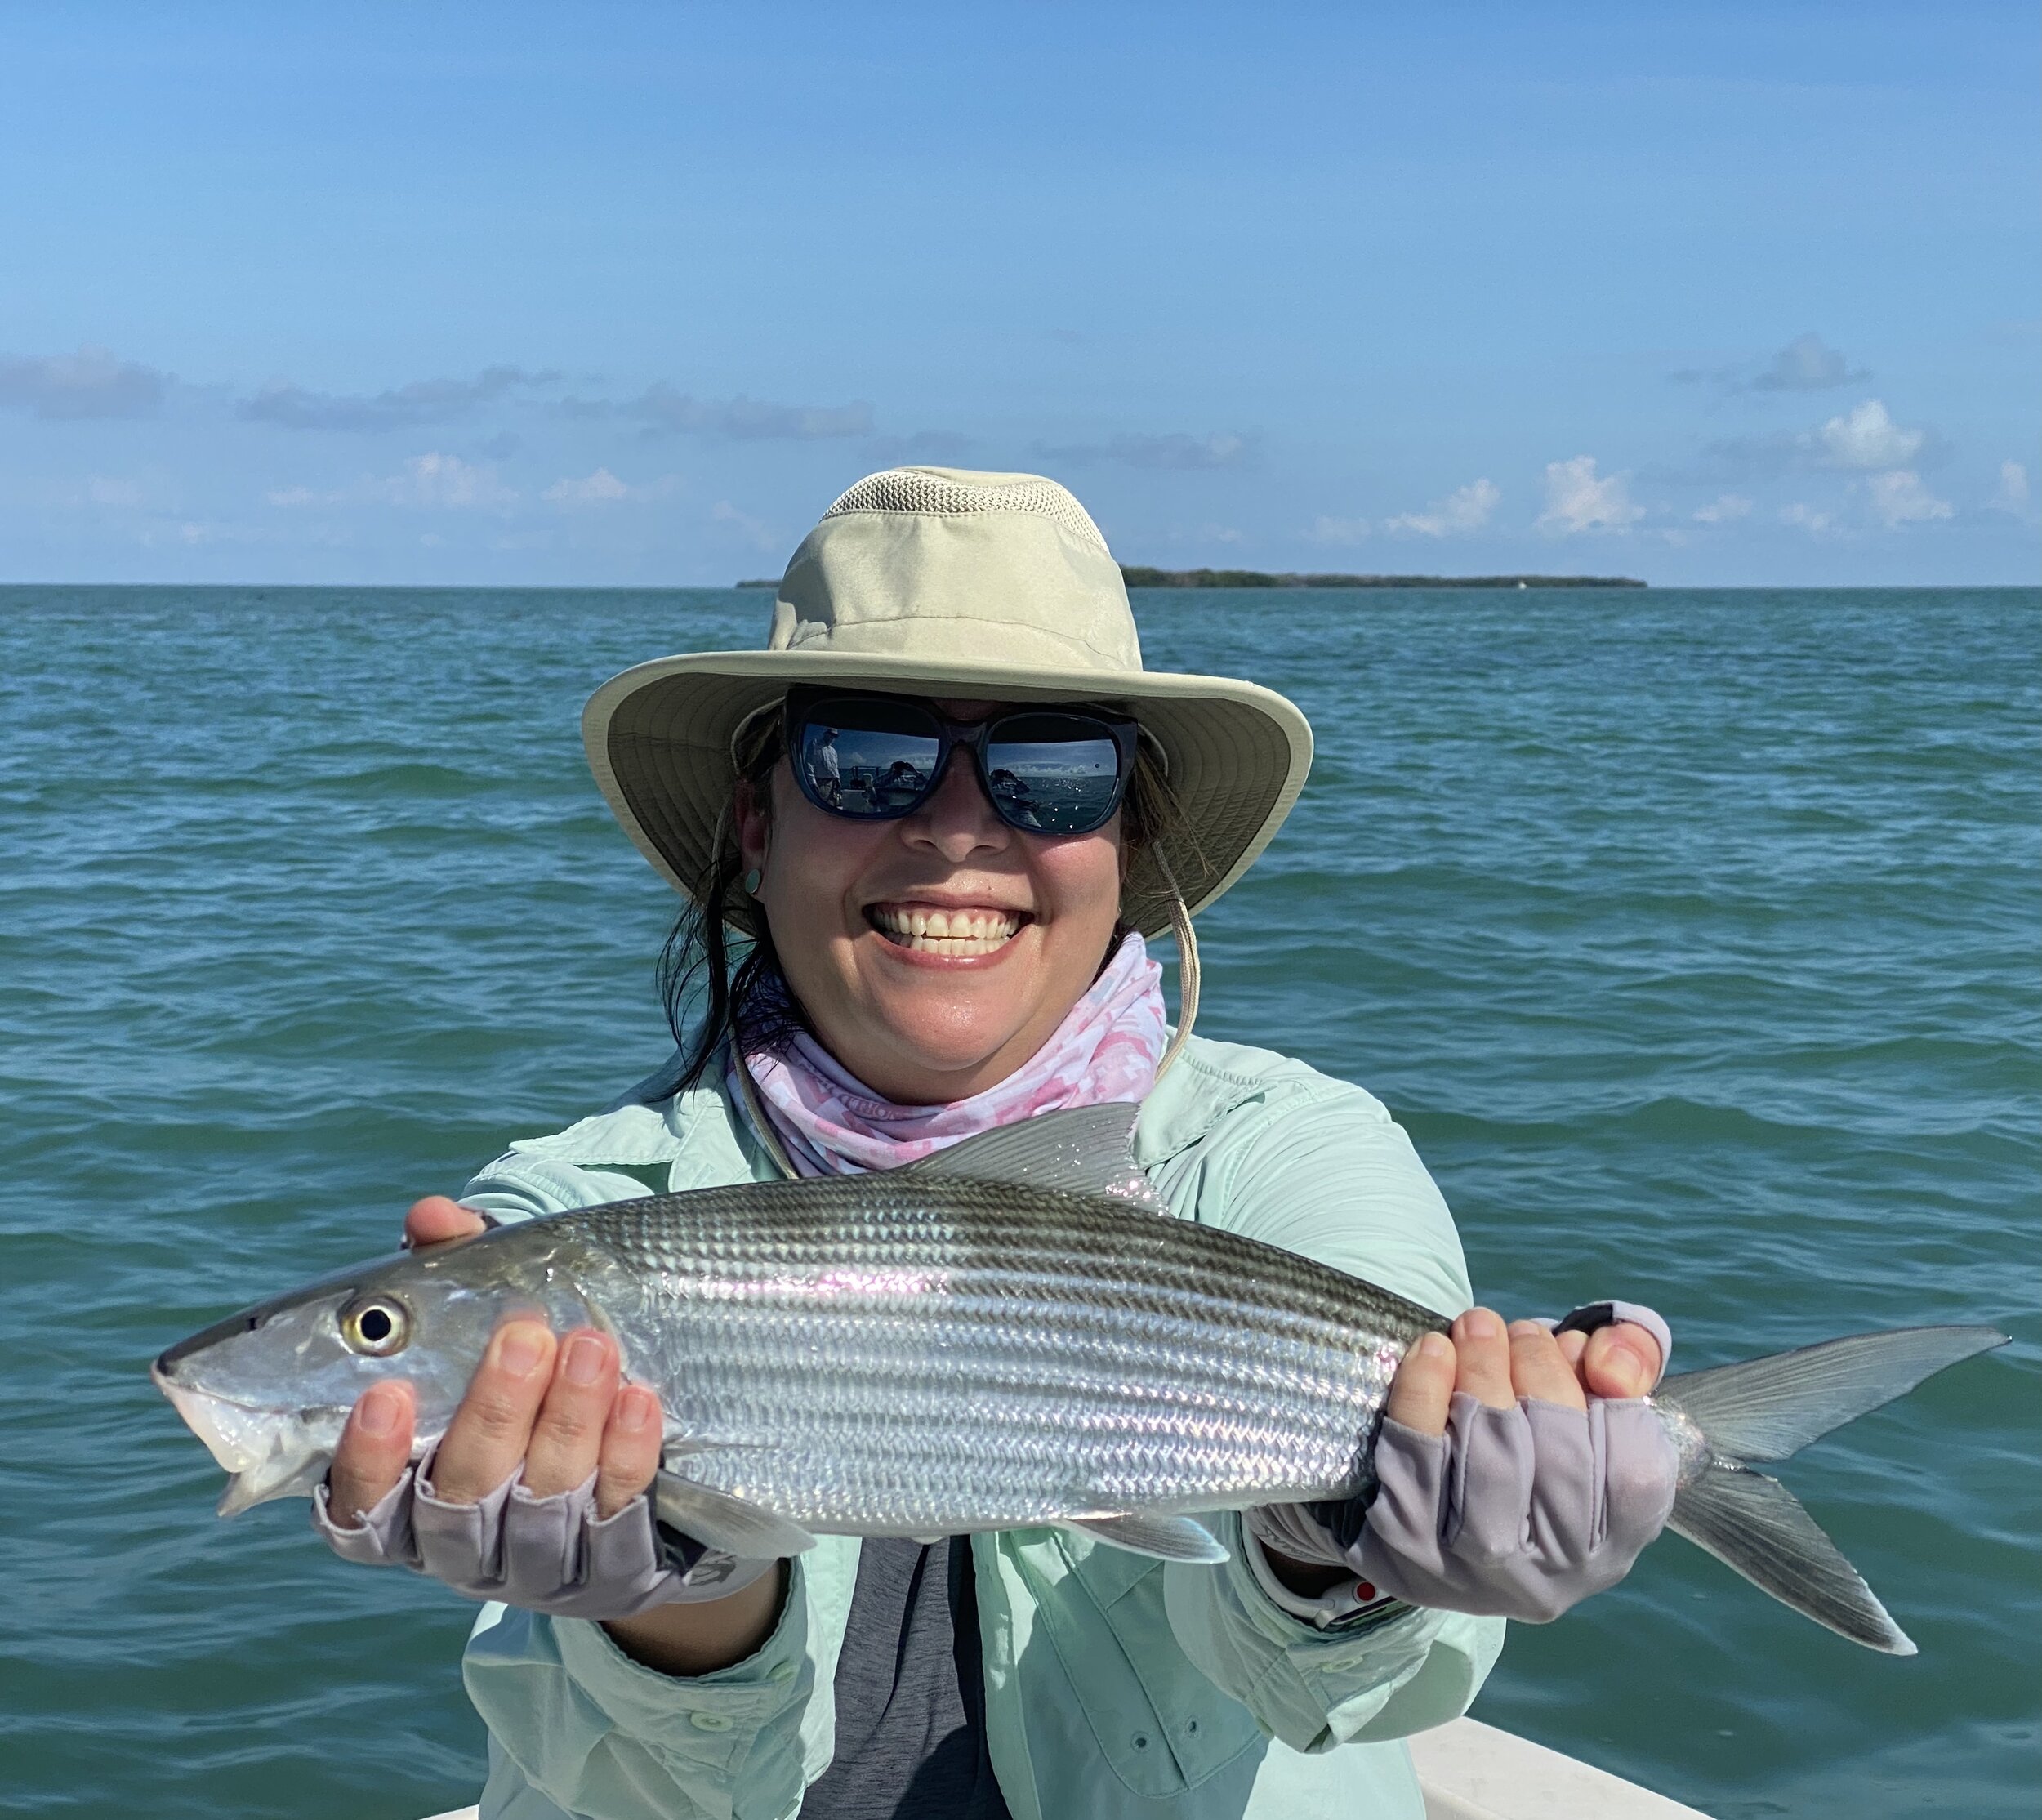 In her spare time, Vivian loves to spend her time fishing and exploring Florida Bay!